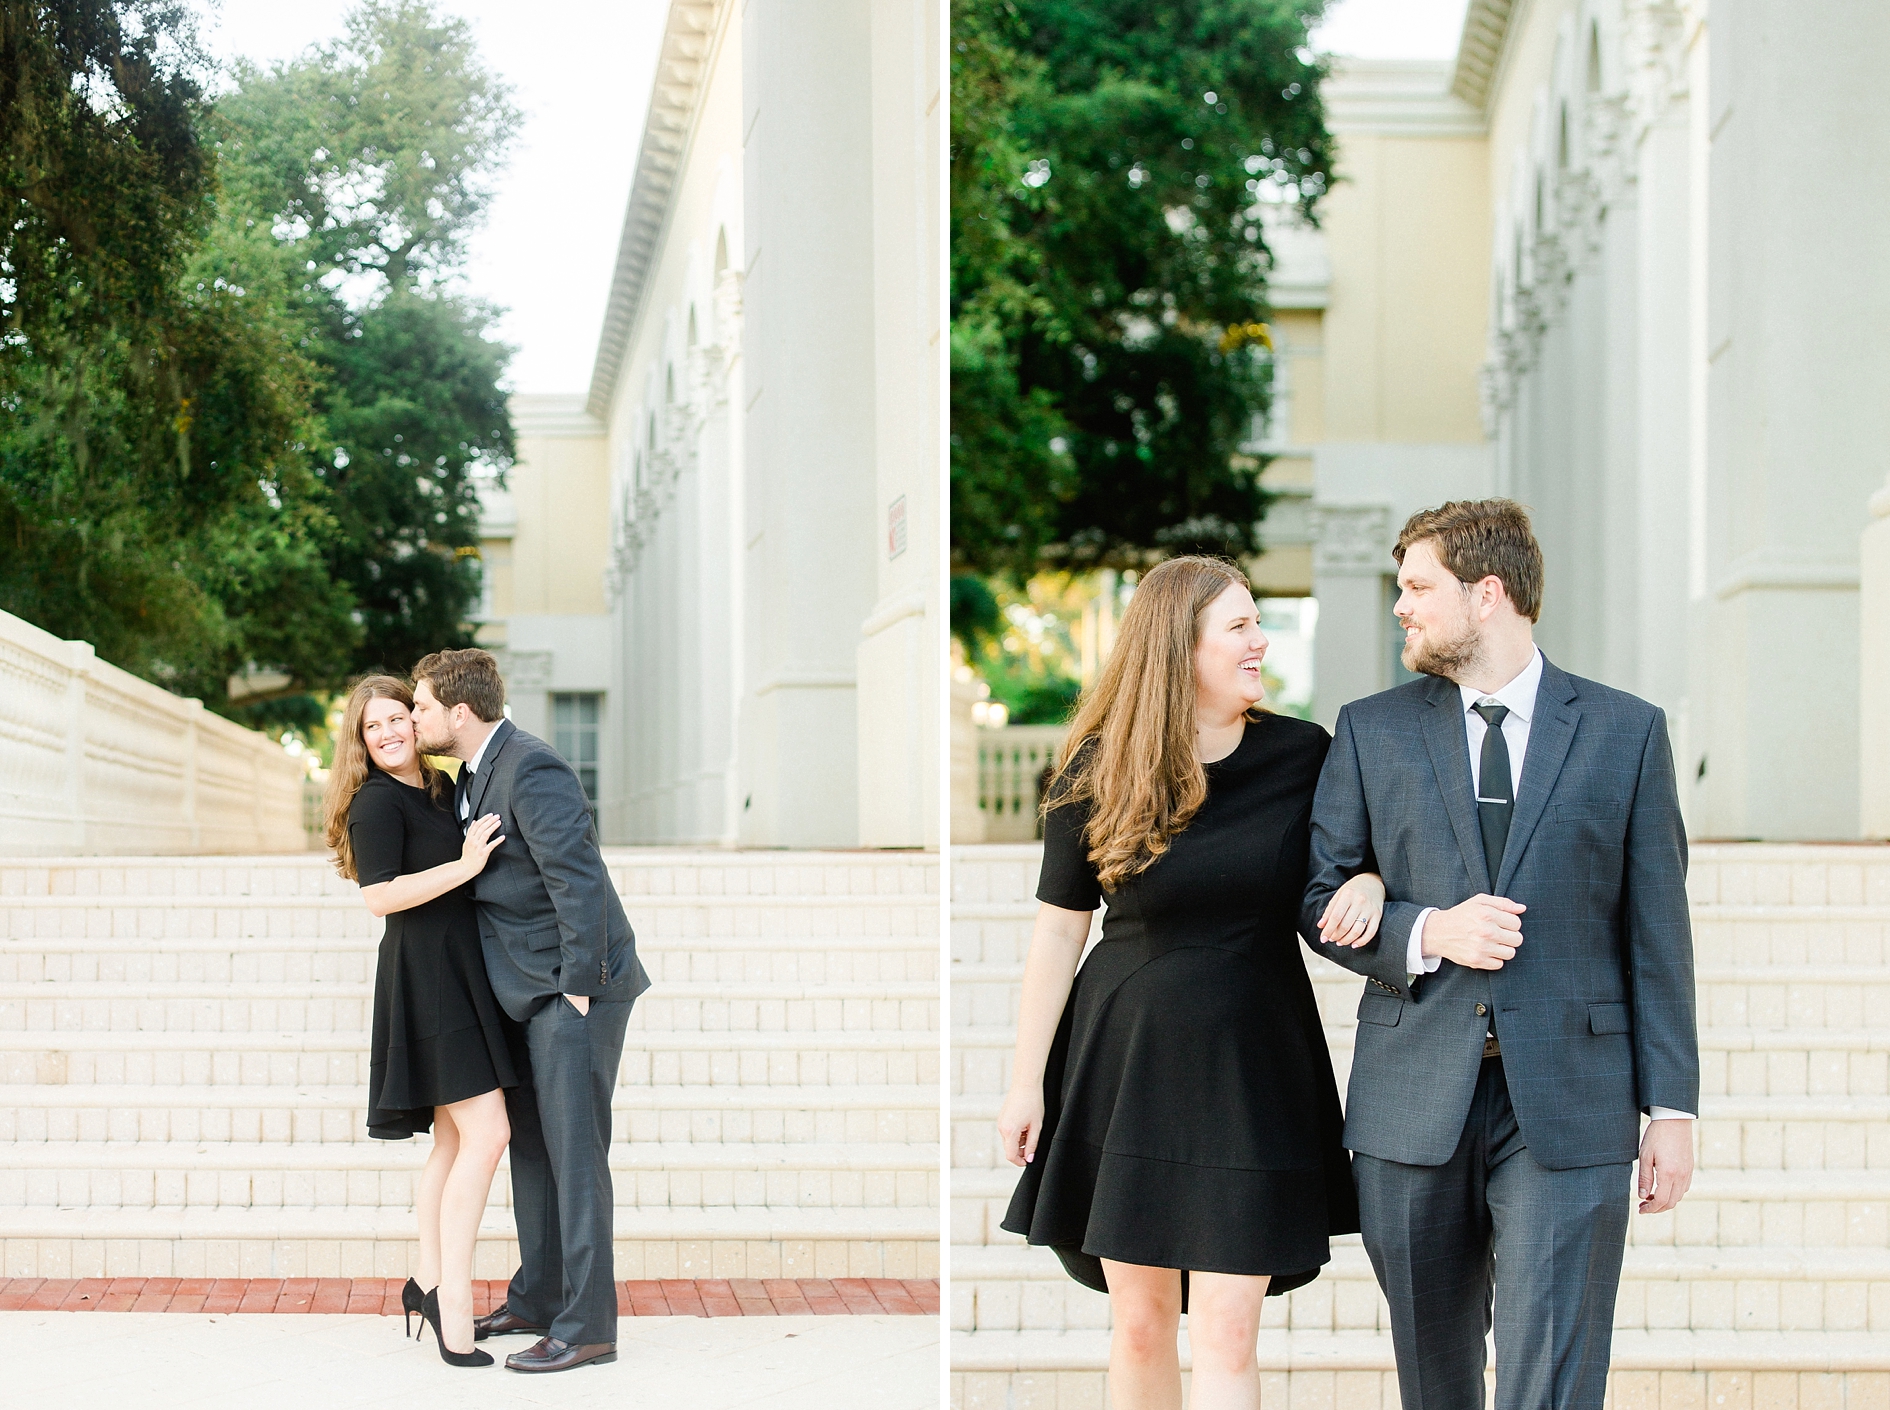 Clearwater Engagement | © Ailyn La Torre Photography 2015